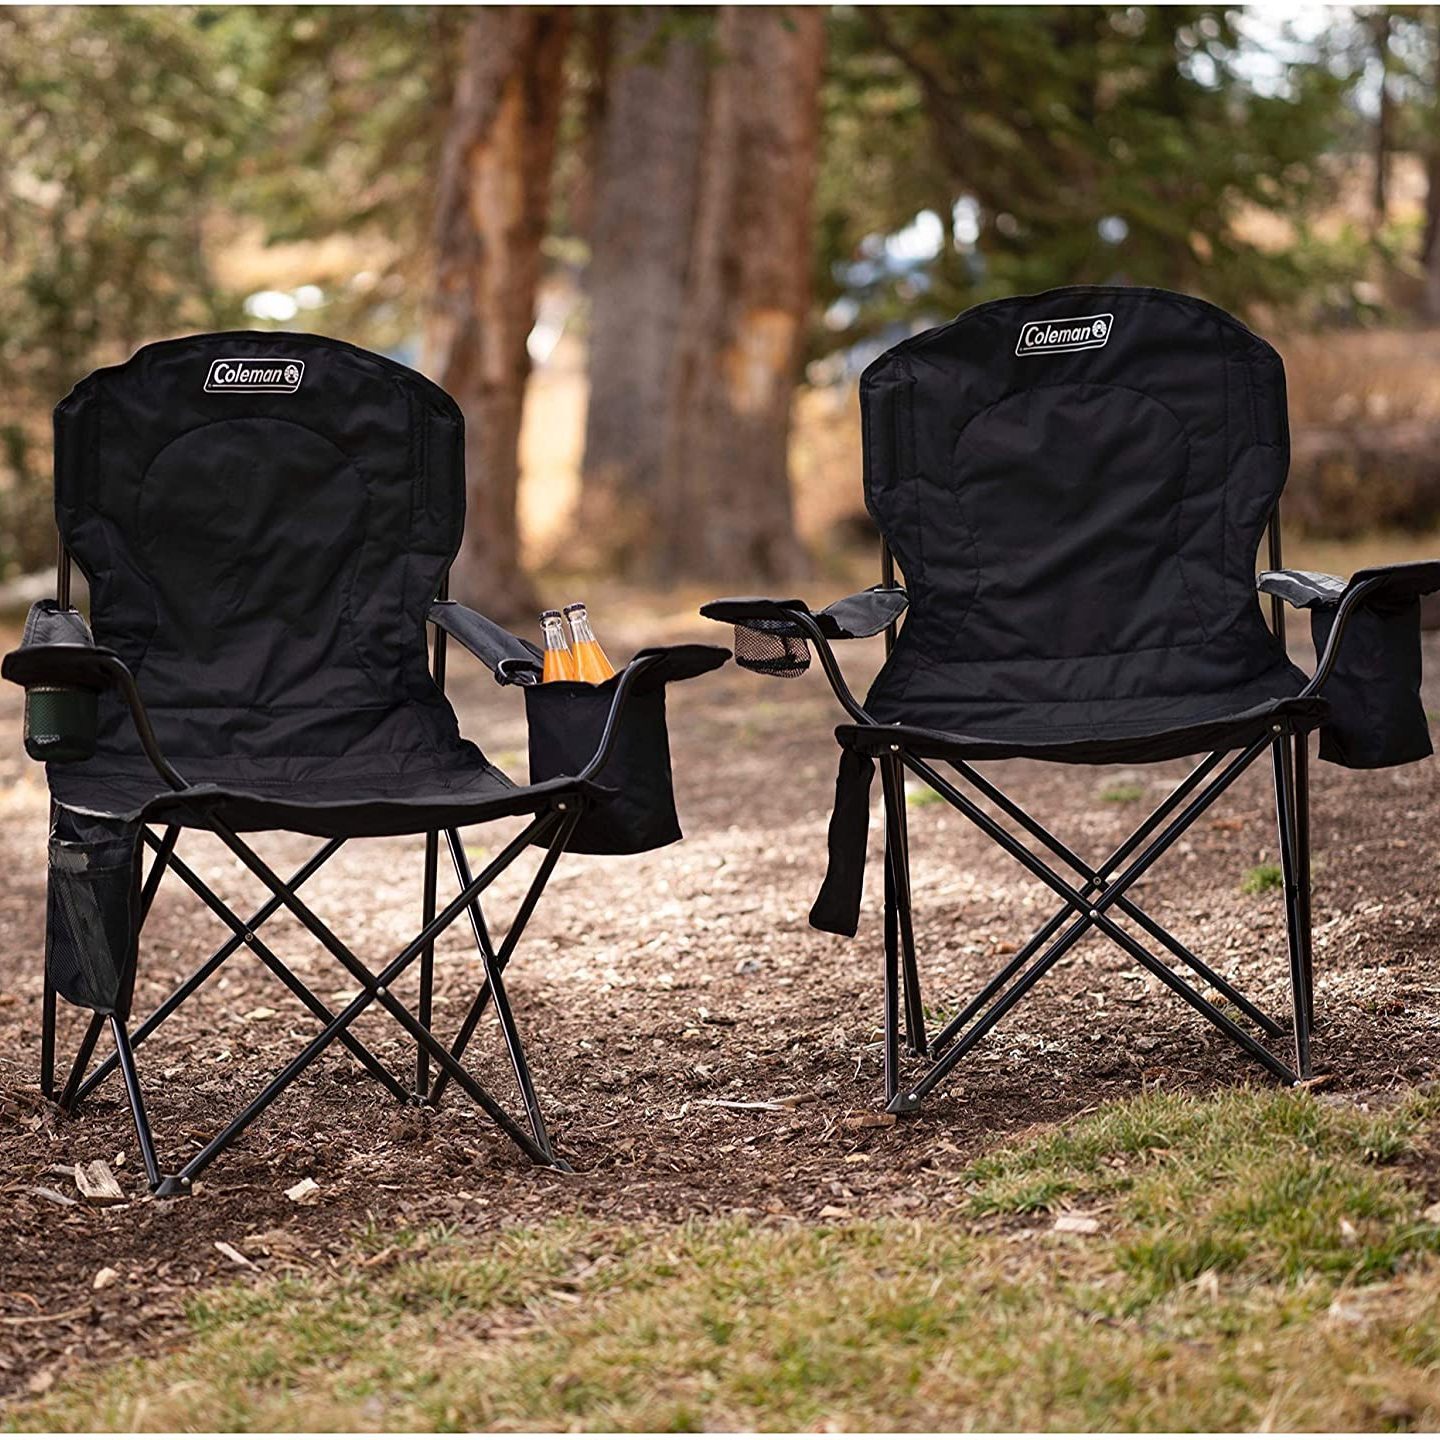 two coleman camping chairs in the woods